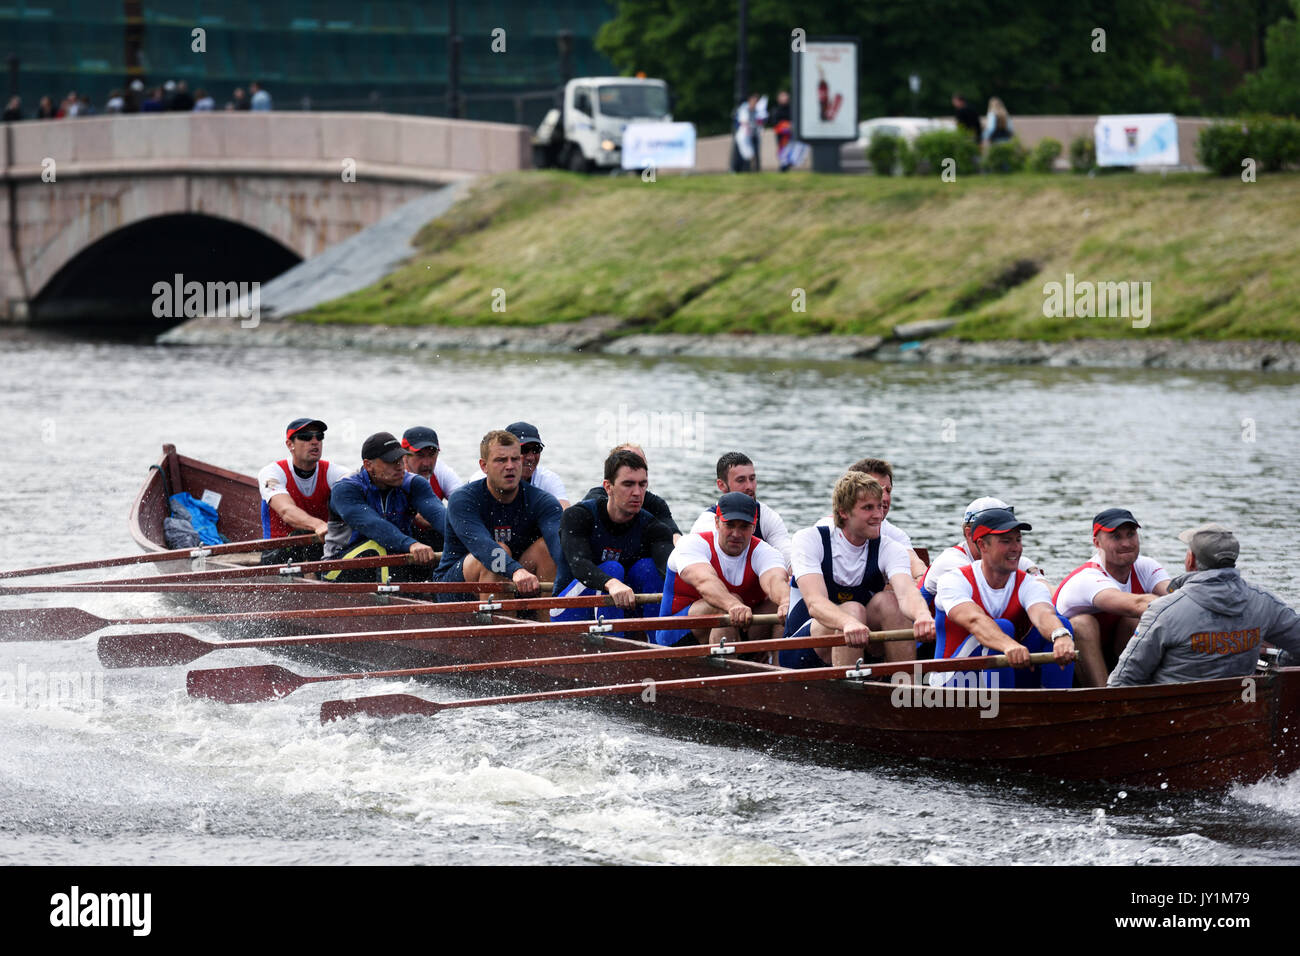 St. Petersburg, Russia - June 12, 2015: Competitions of Viking boats during the Golden Blades Regatta. This kind of competitions make the race accessi Stock Photo